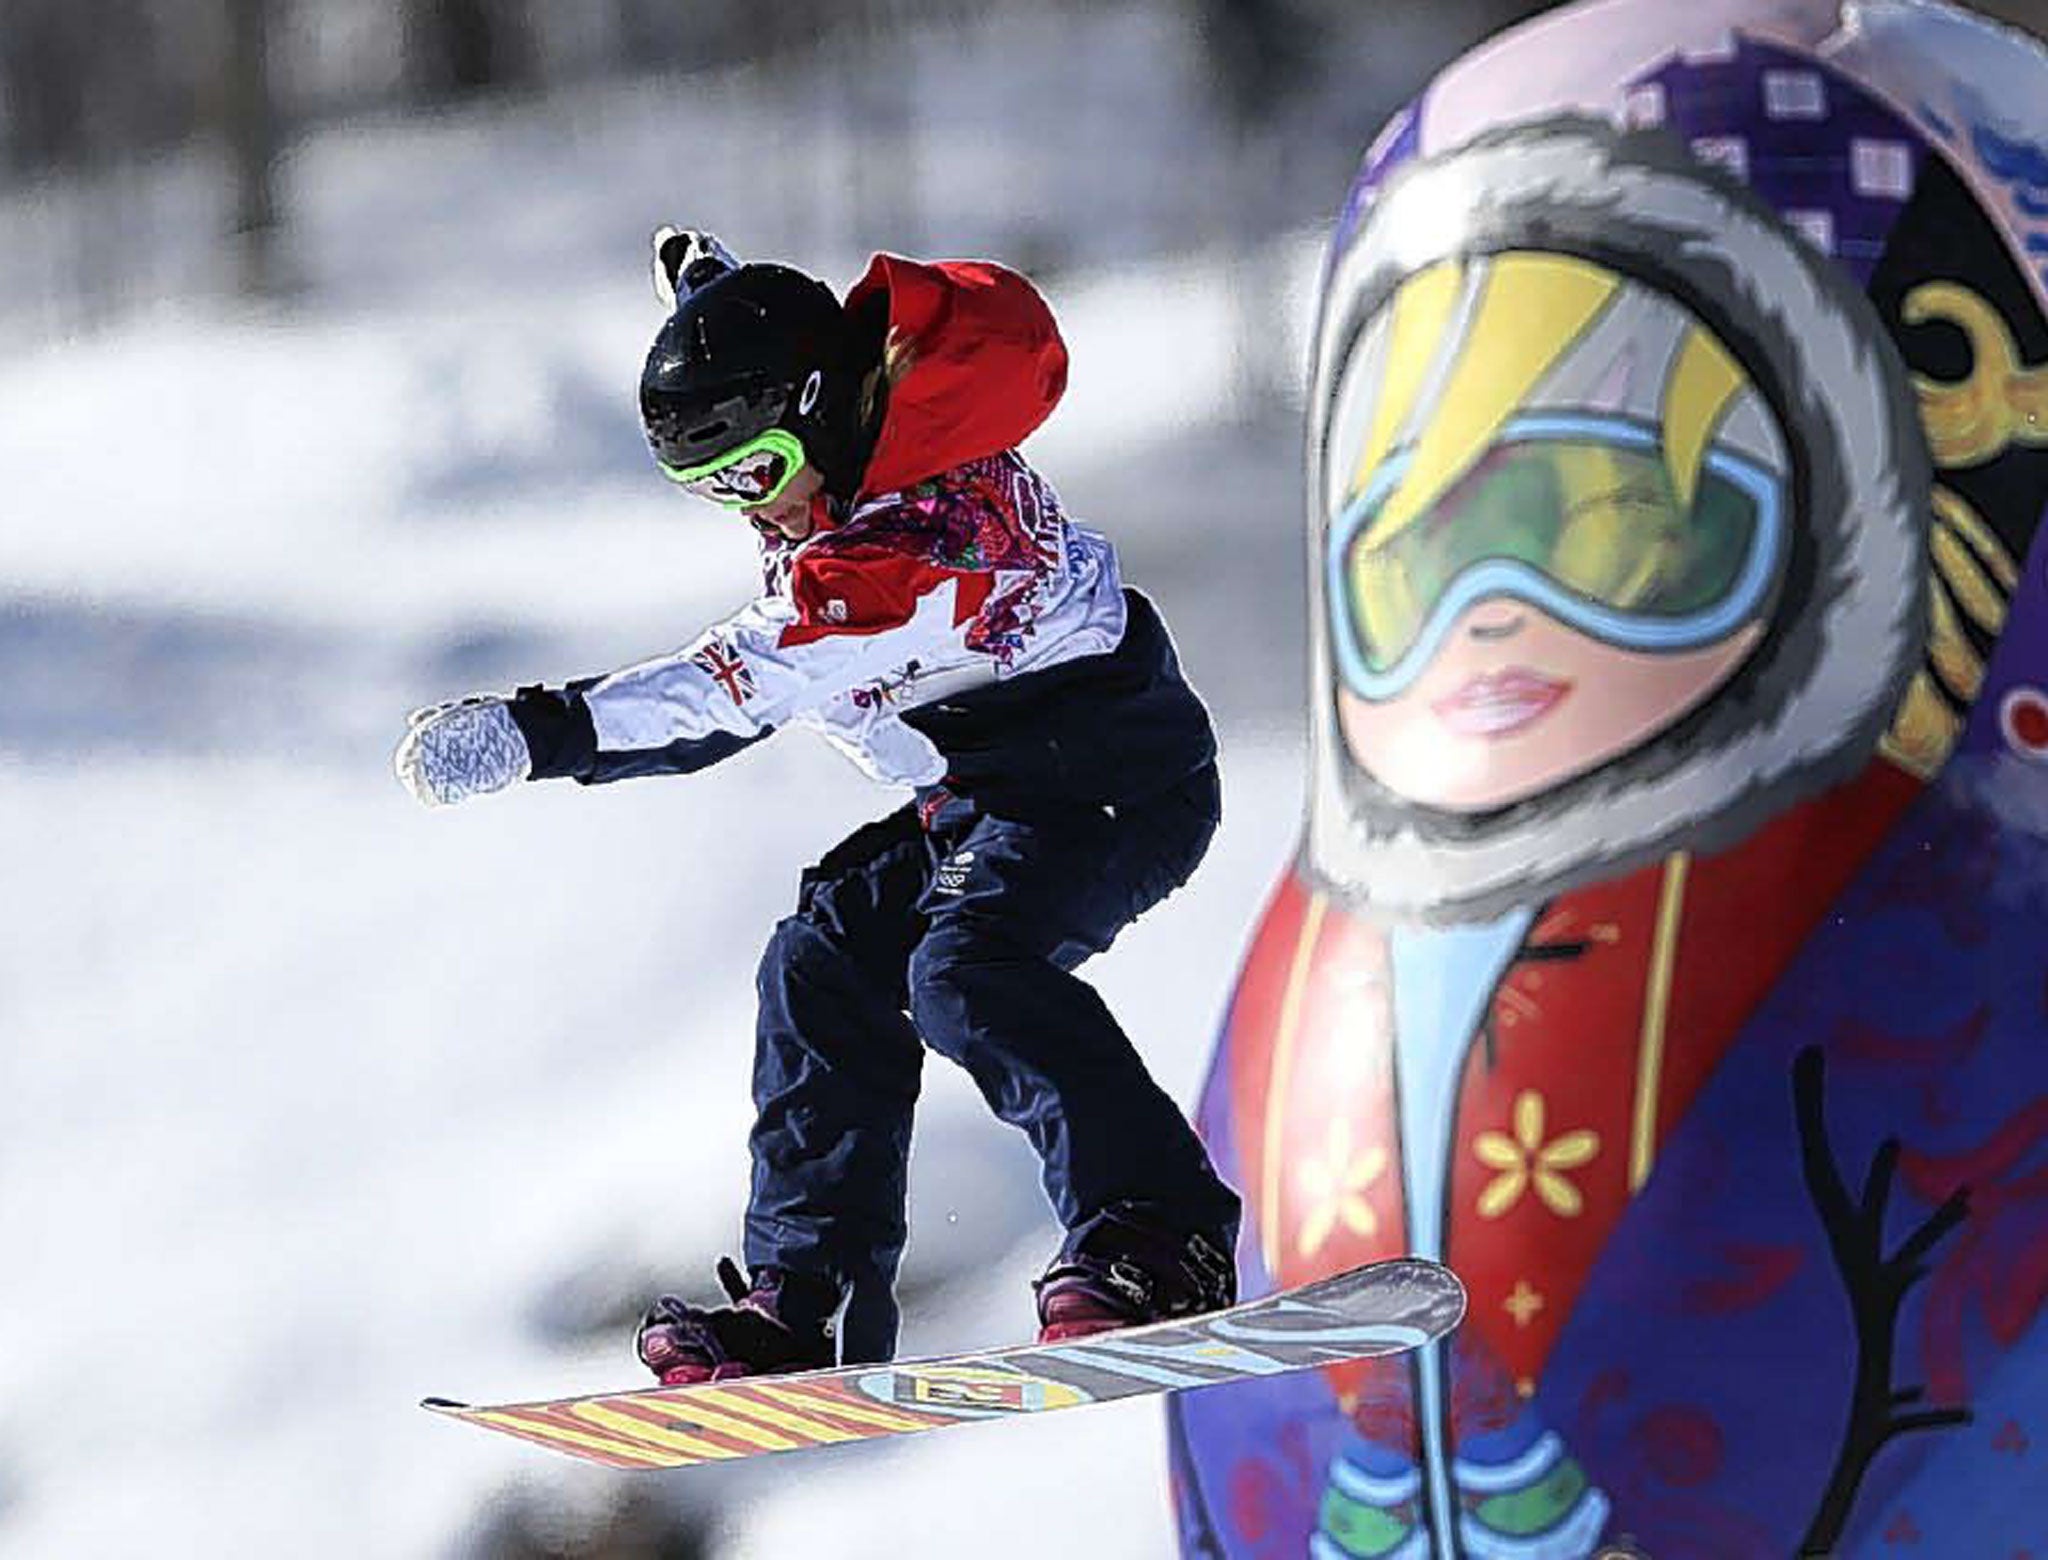 A competitor takes a jump past a giant matryoshka doll during a
snowboard slopestyle training session at the Rosa Khutor Extreme Park in Krasnaya